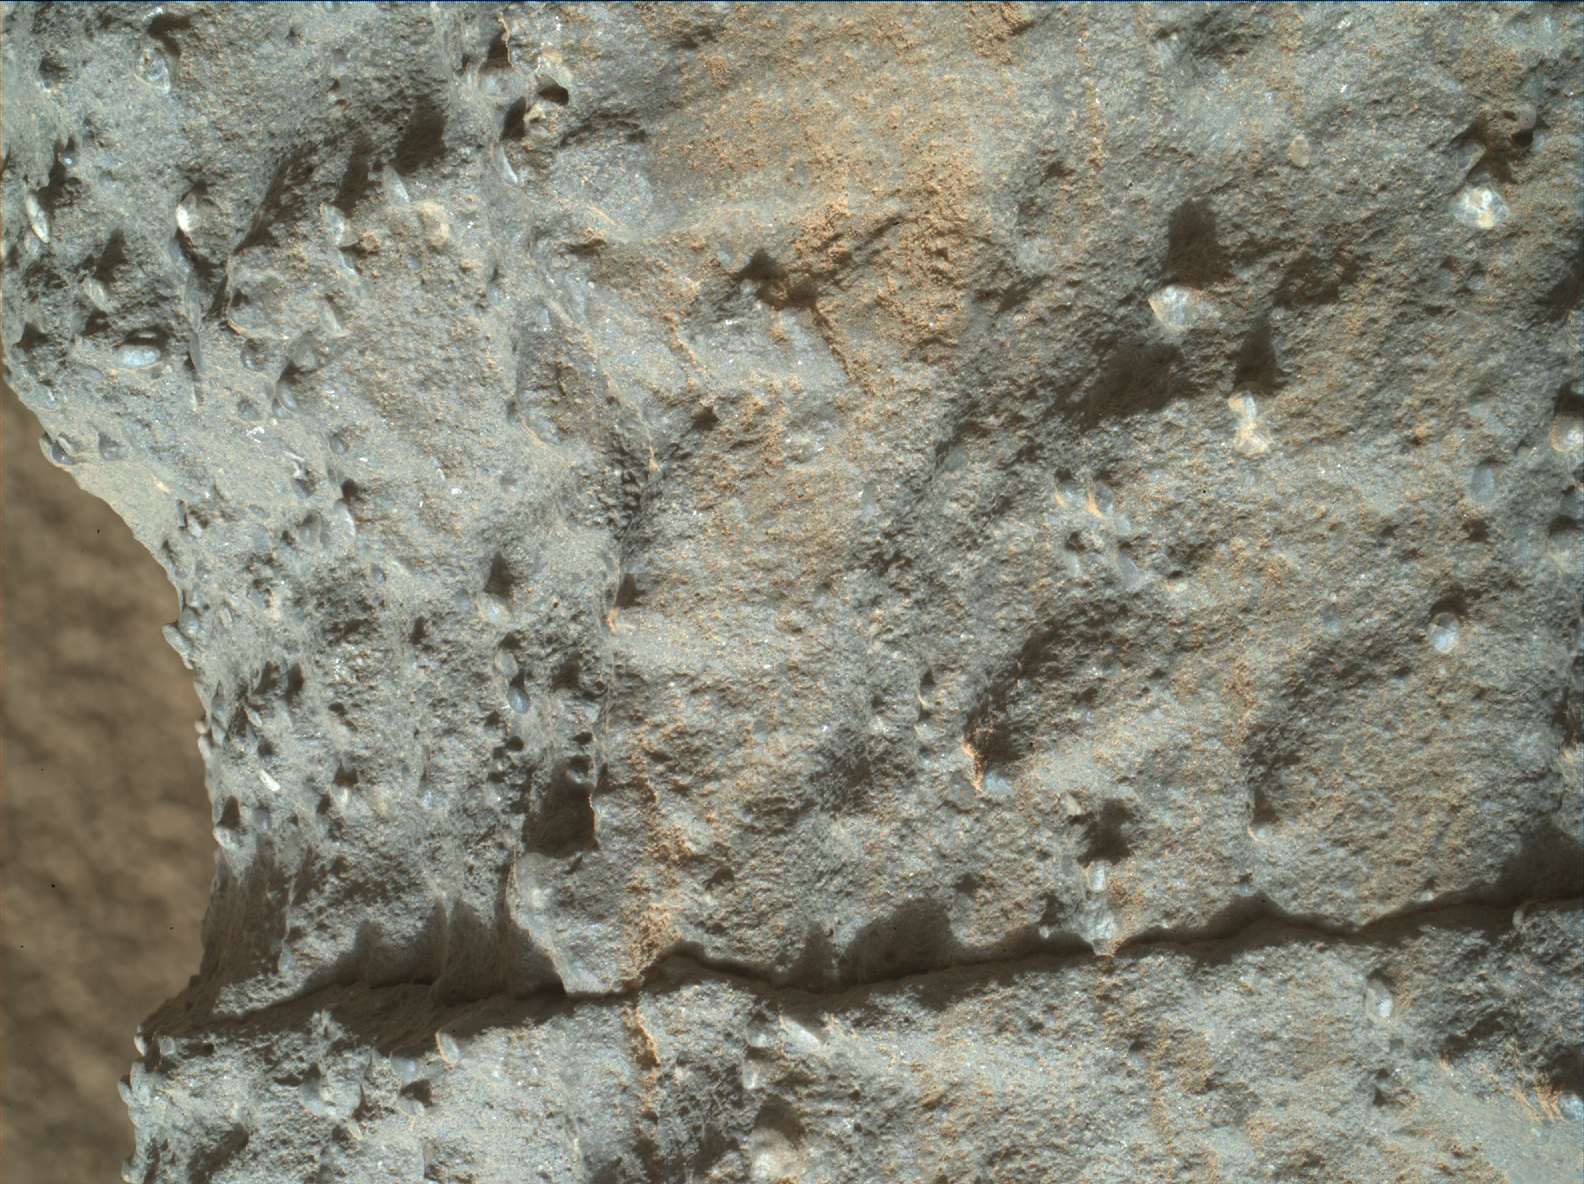 Nasa's Mars rover Curiosity acquired this image using its Mars Hand Lens Imager (MAHLI) on Sol 586